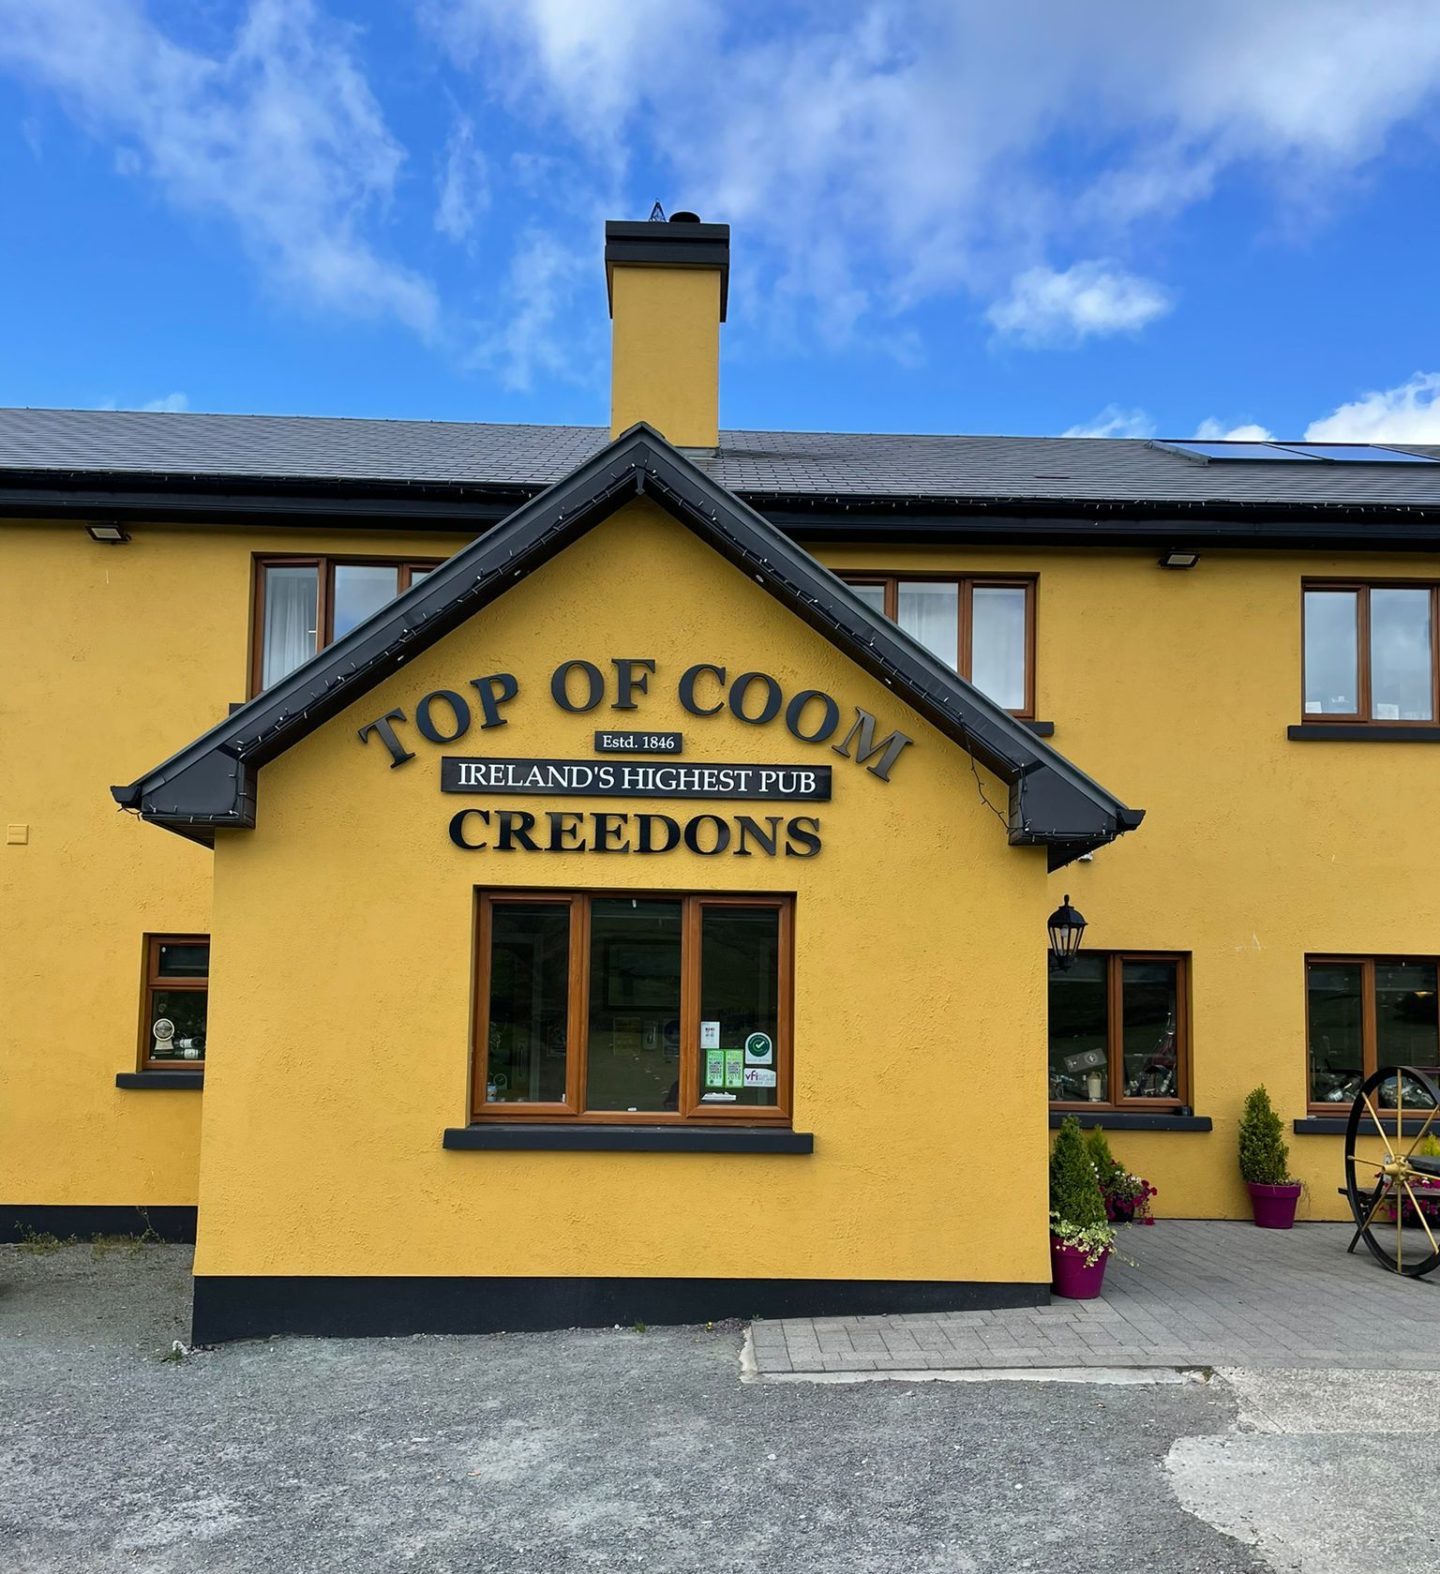 The Top of Croom pub in Co Kerry